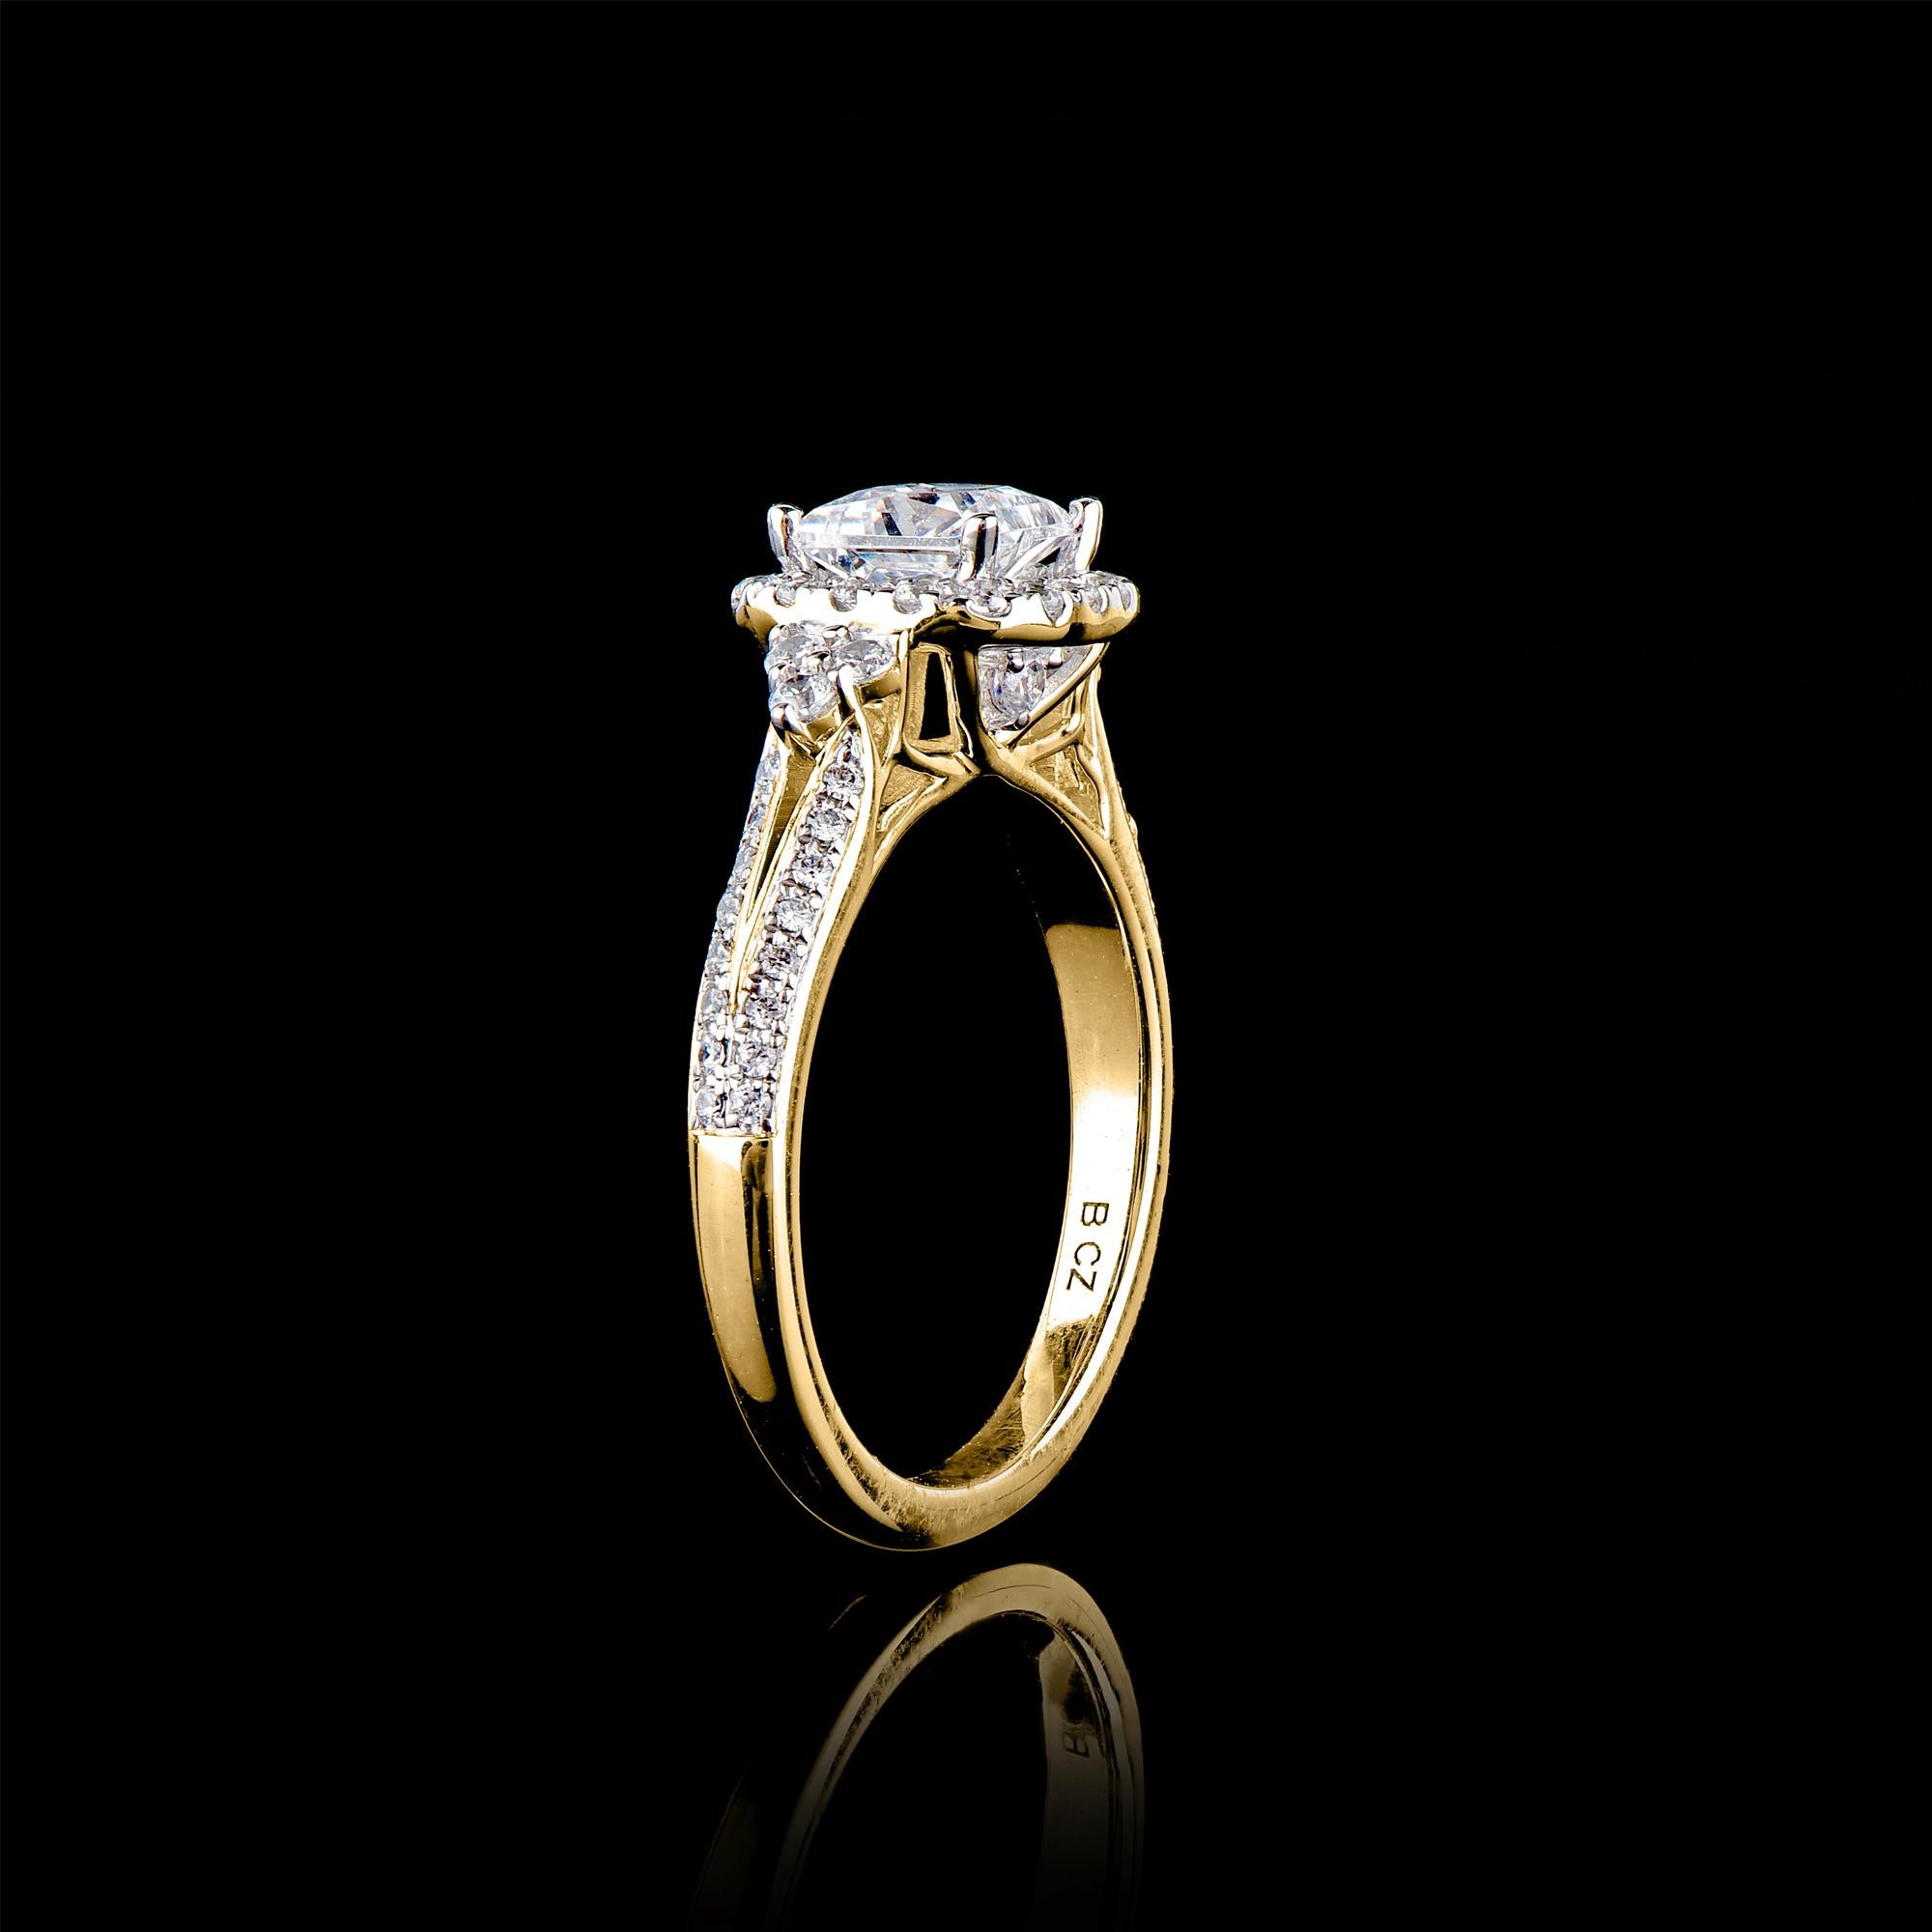 Exquisite diamond engagement ring features 0.80 ct centre stone and 0.43 ct of diamond frame and split shank lined diamonds. Expertly Crafted of sparkling 18 karat solid white gold in high polish finish and set with 56 sparkling round and 1